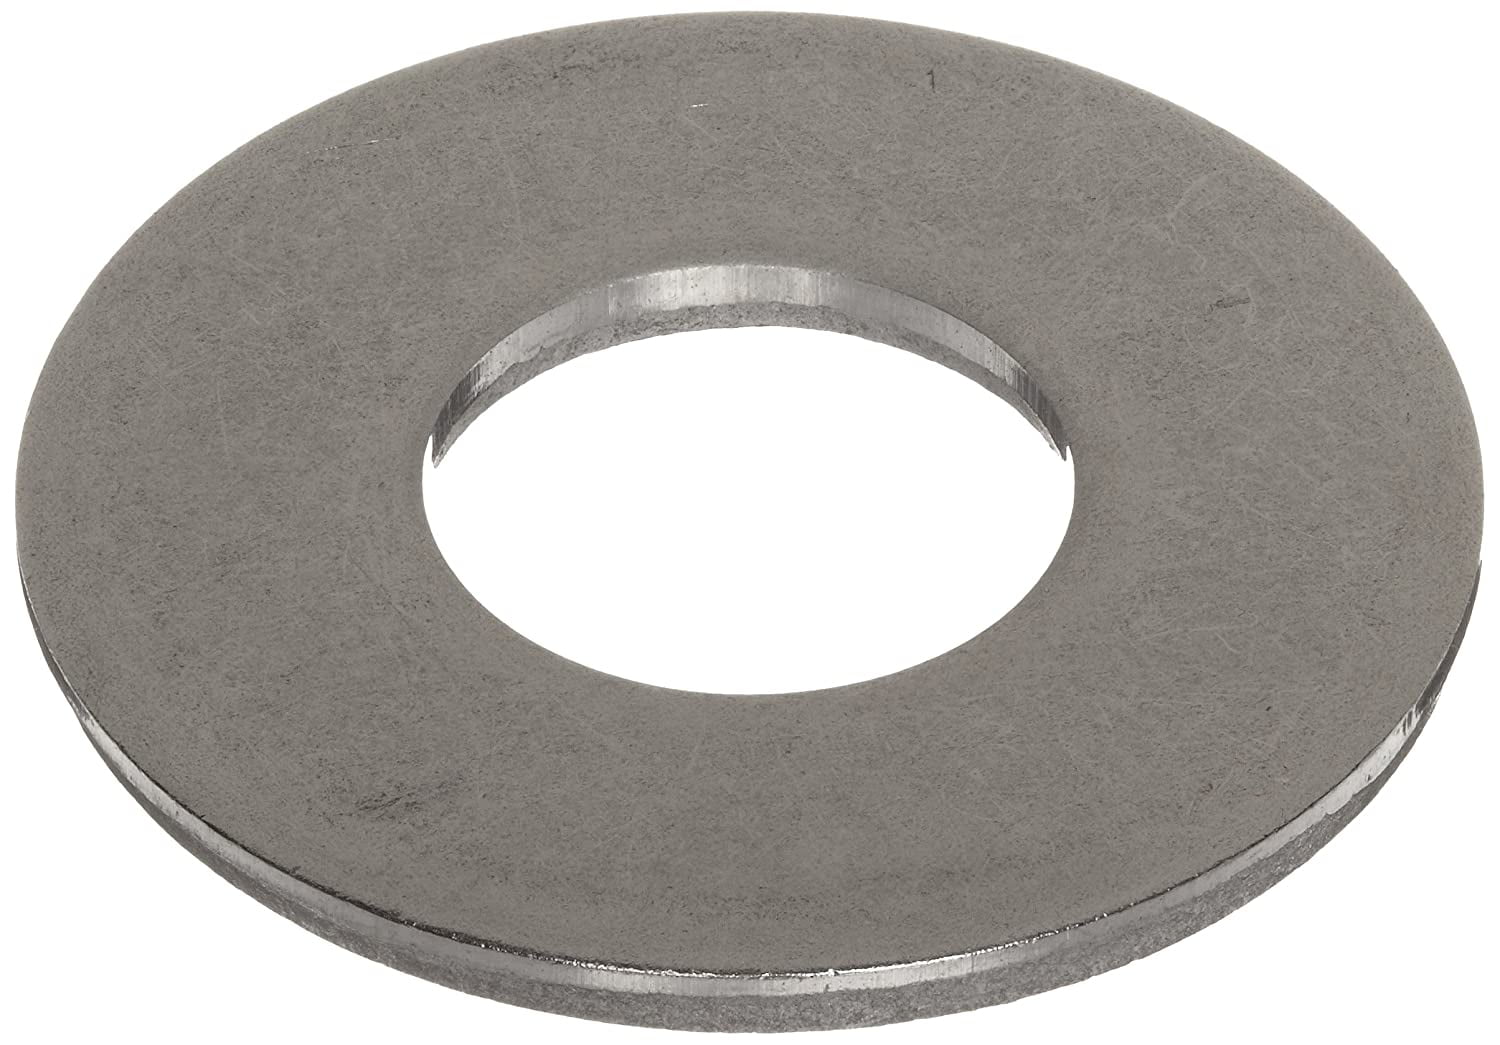 #12 Flat Washer 18-8 Stainless Steel .563 .250 .05 Box of 50 